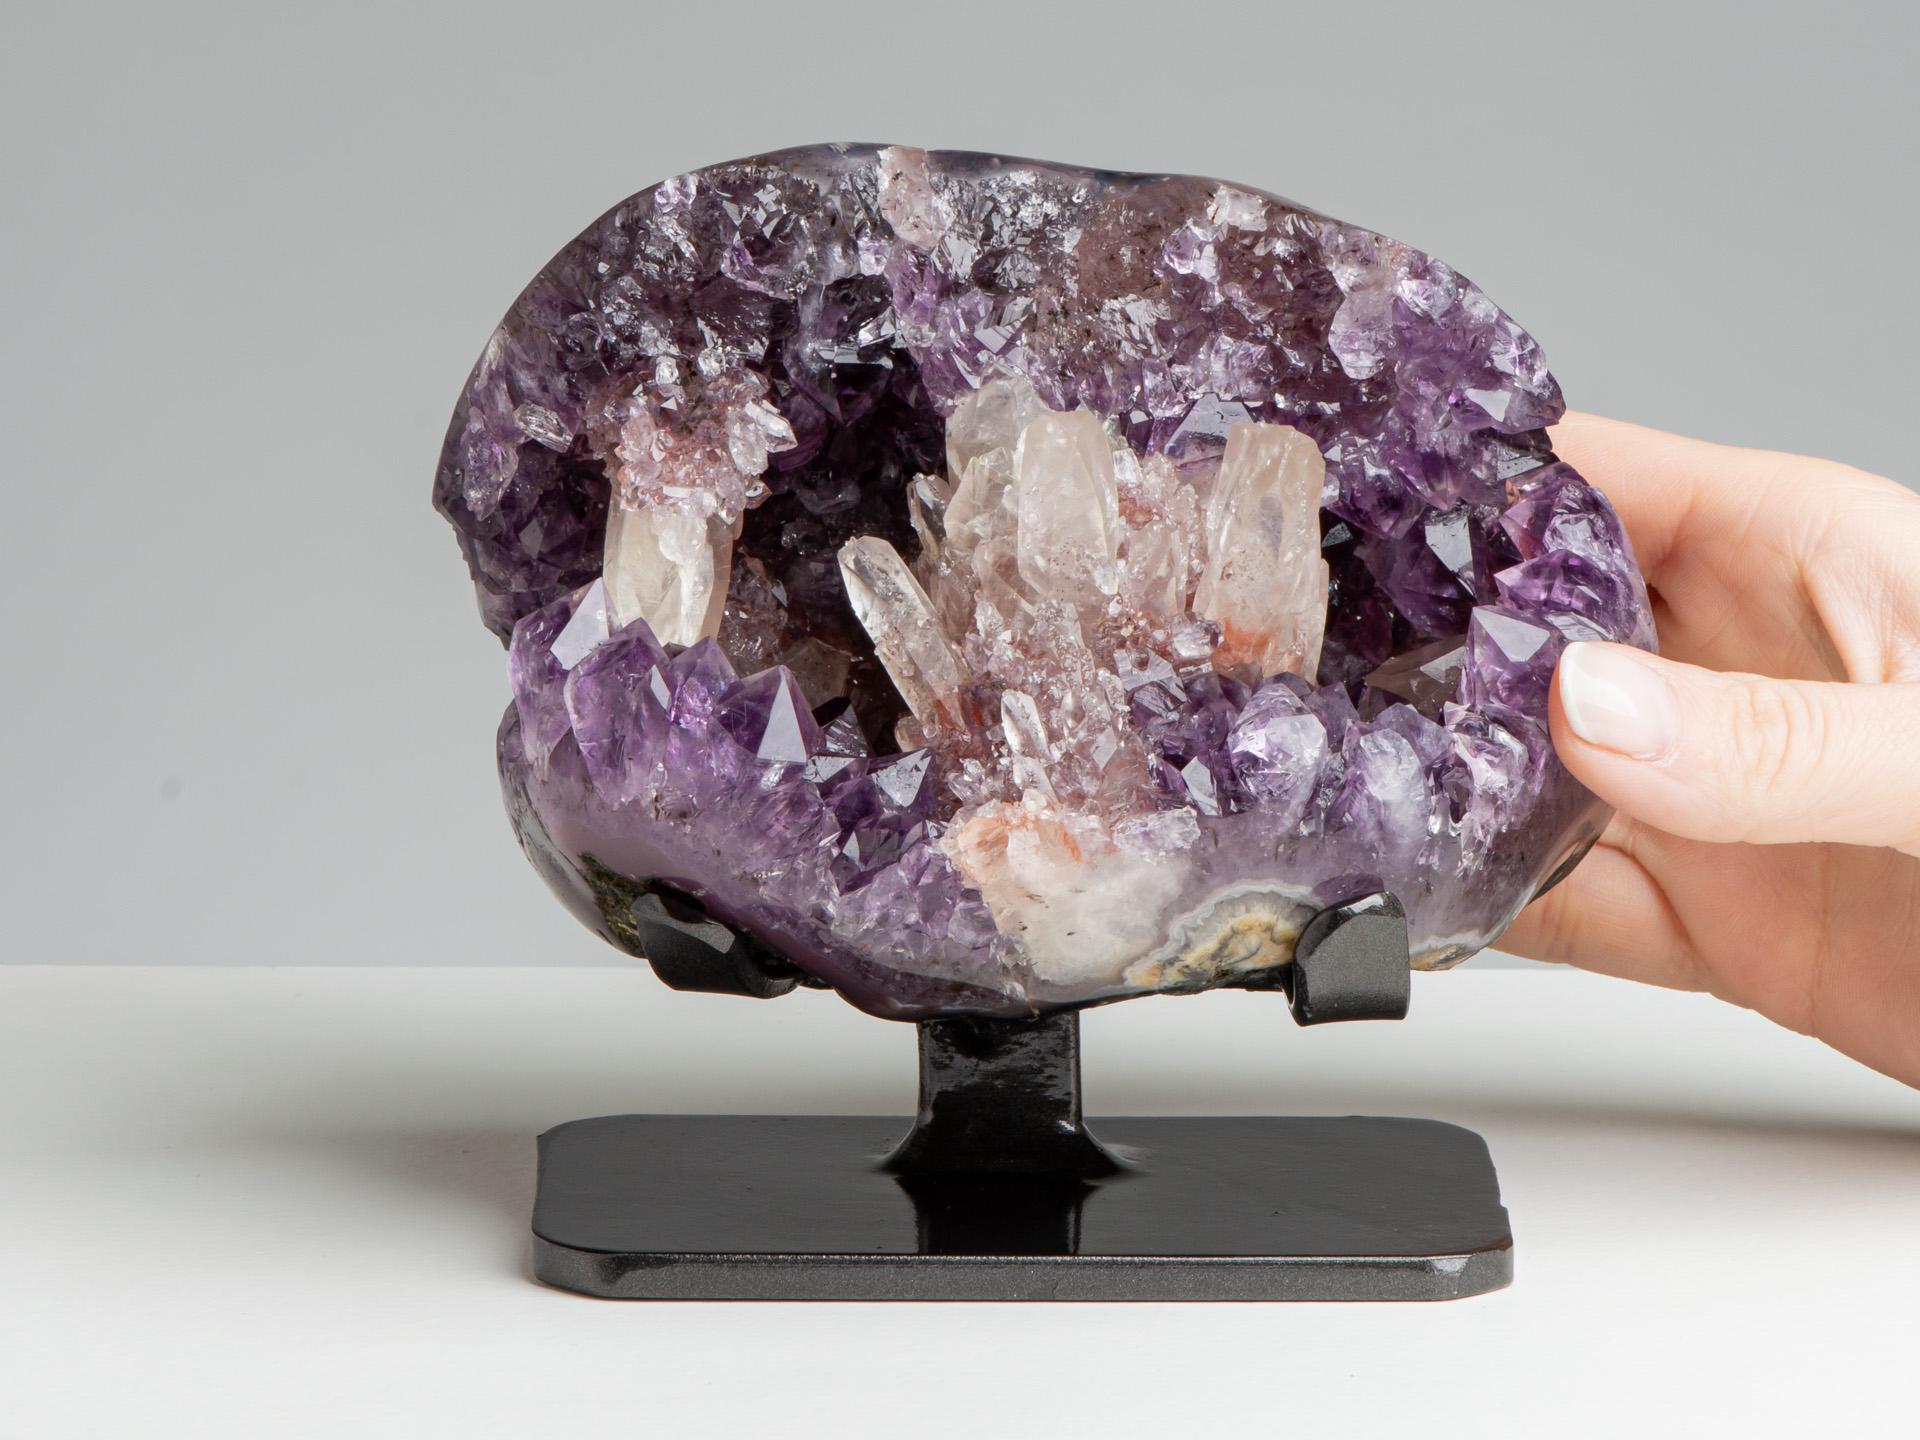 This small geode of lilac coloured amethystine quartz with several rhombohedral
calcites at the front and red druze / blackish goethite accents.

This piece was legally and ethically sourced directly in the prestigious mines of Uruguay, South